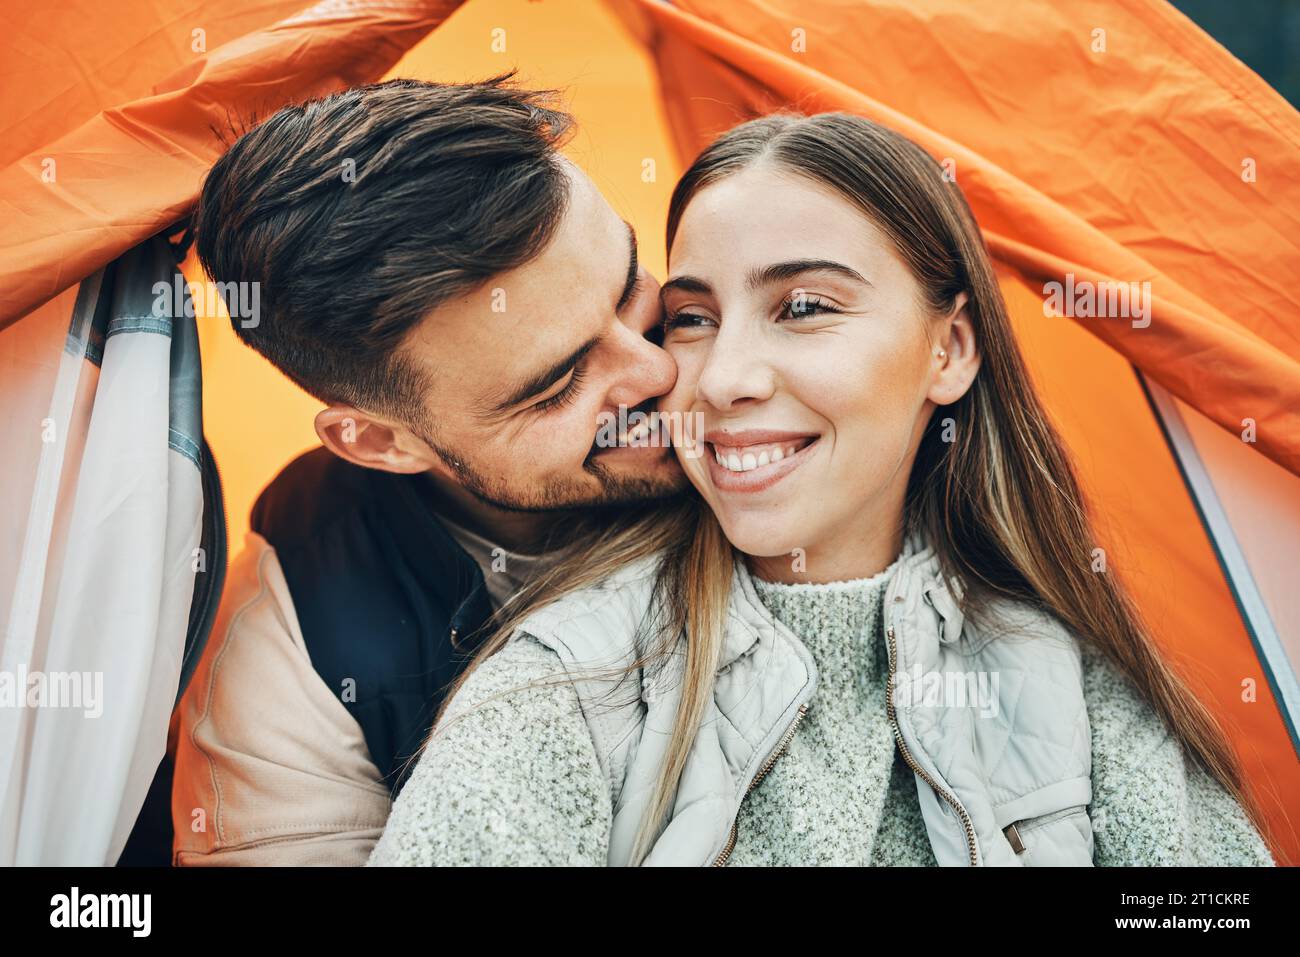 Happy Couple Kiss And Tent For Camping Holiday Or Outdoor Vacation Together In Affection